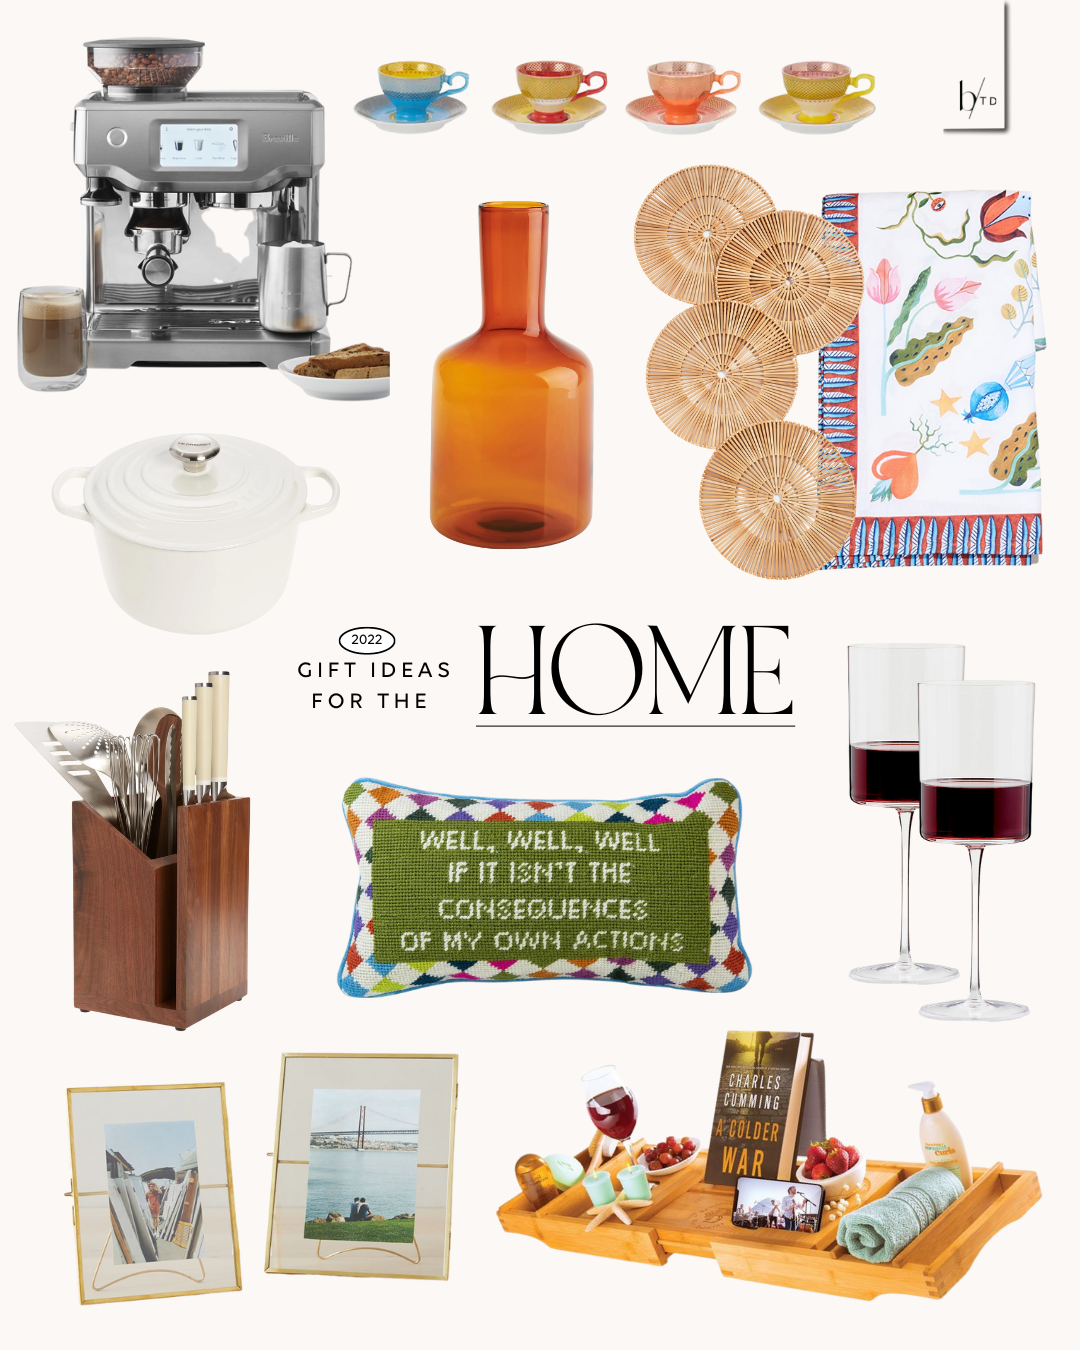 2022 GIFT GUIDE: UNIQUE GIFTS FOR THE HOME